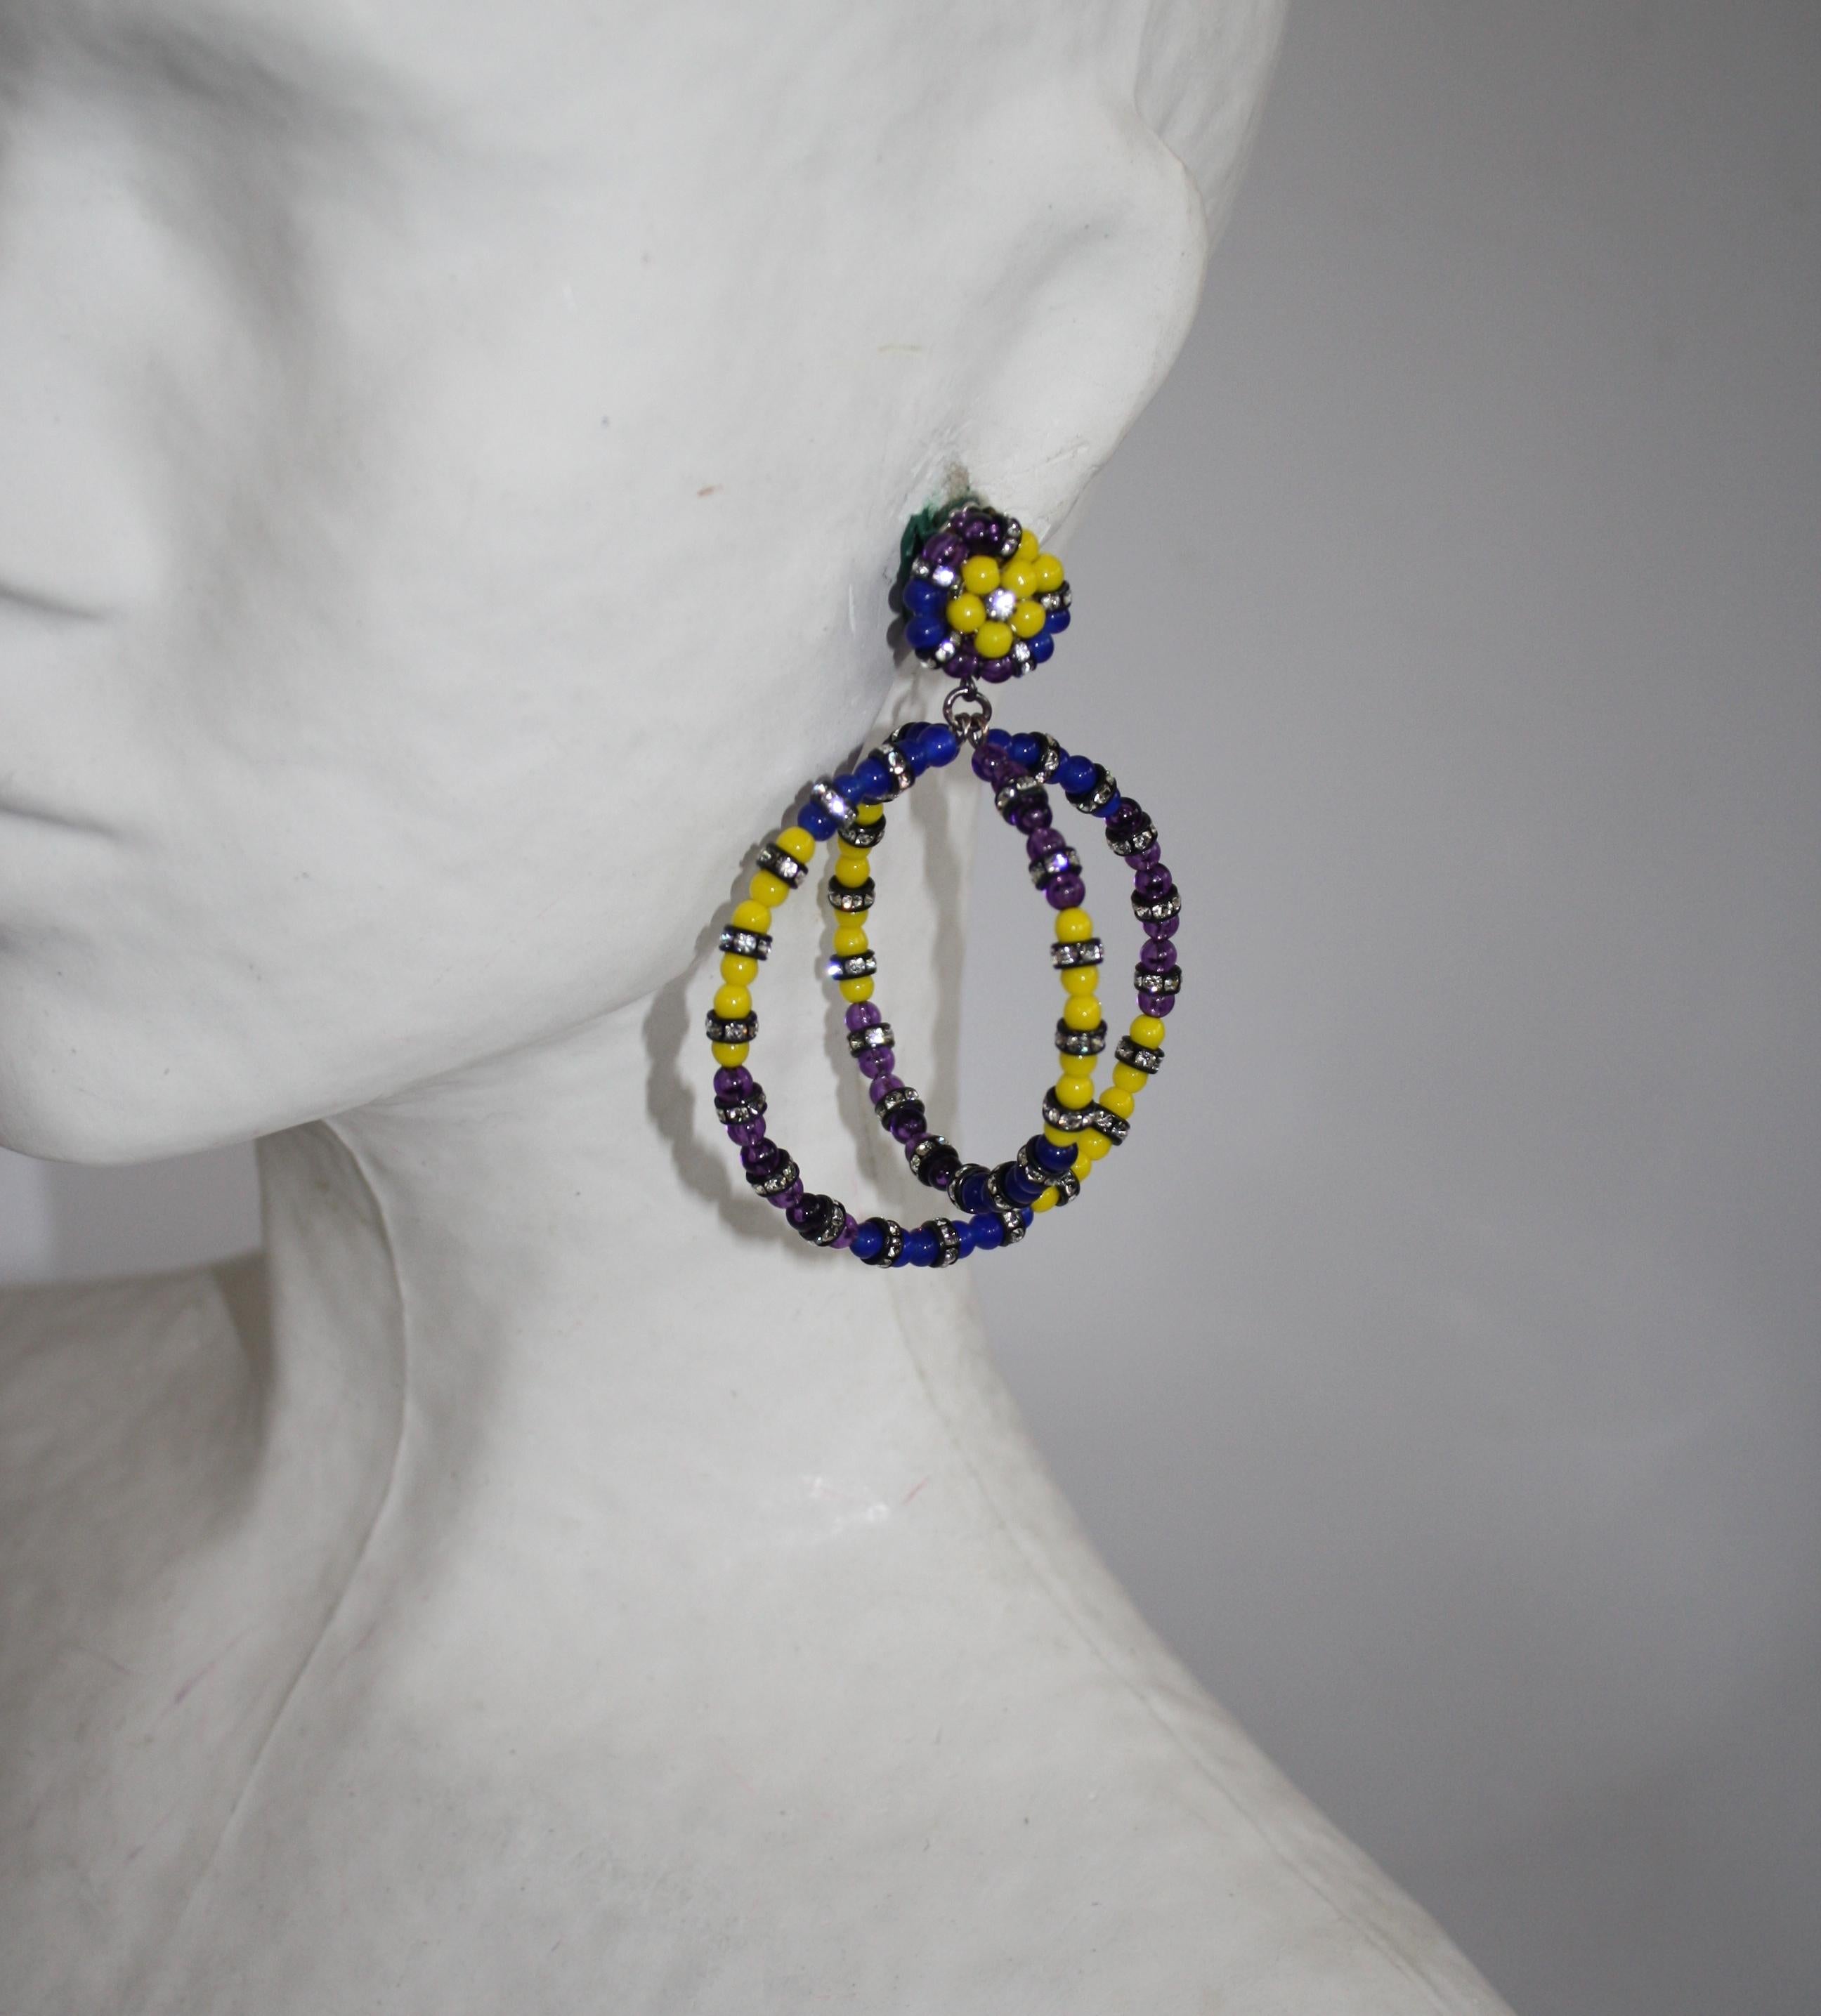 Yellow and purple handmade glass bead and Swarovski crystal clip earrings from Francoise Montague. 